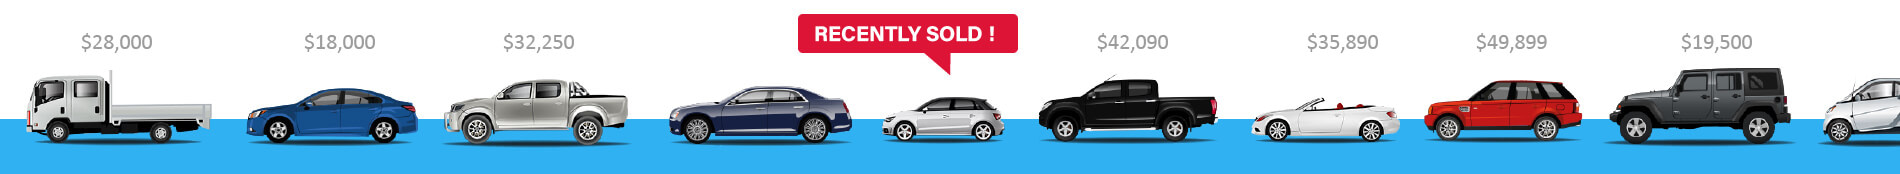 sell my used car online